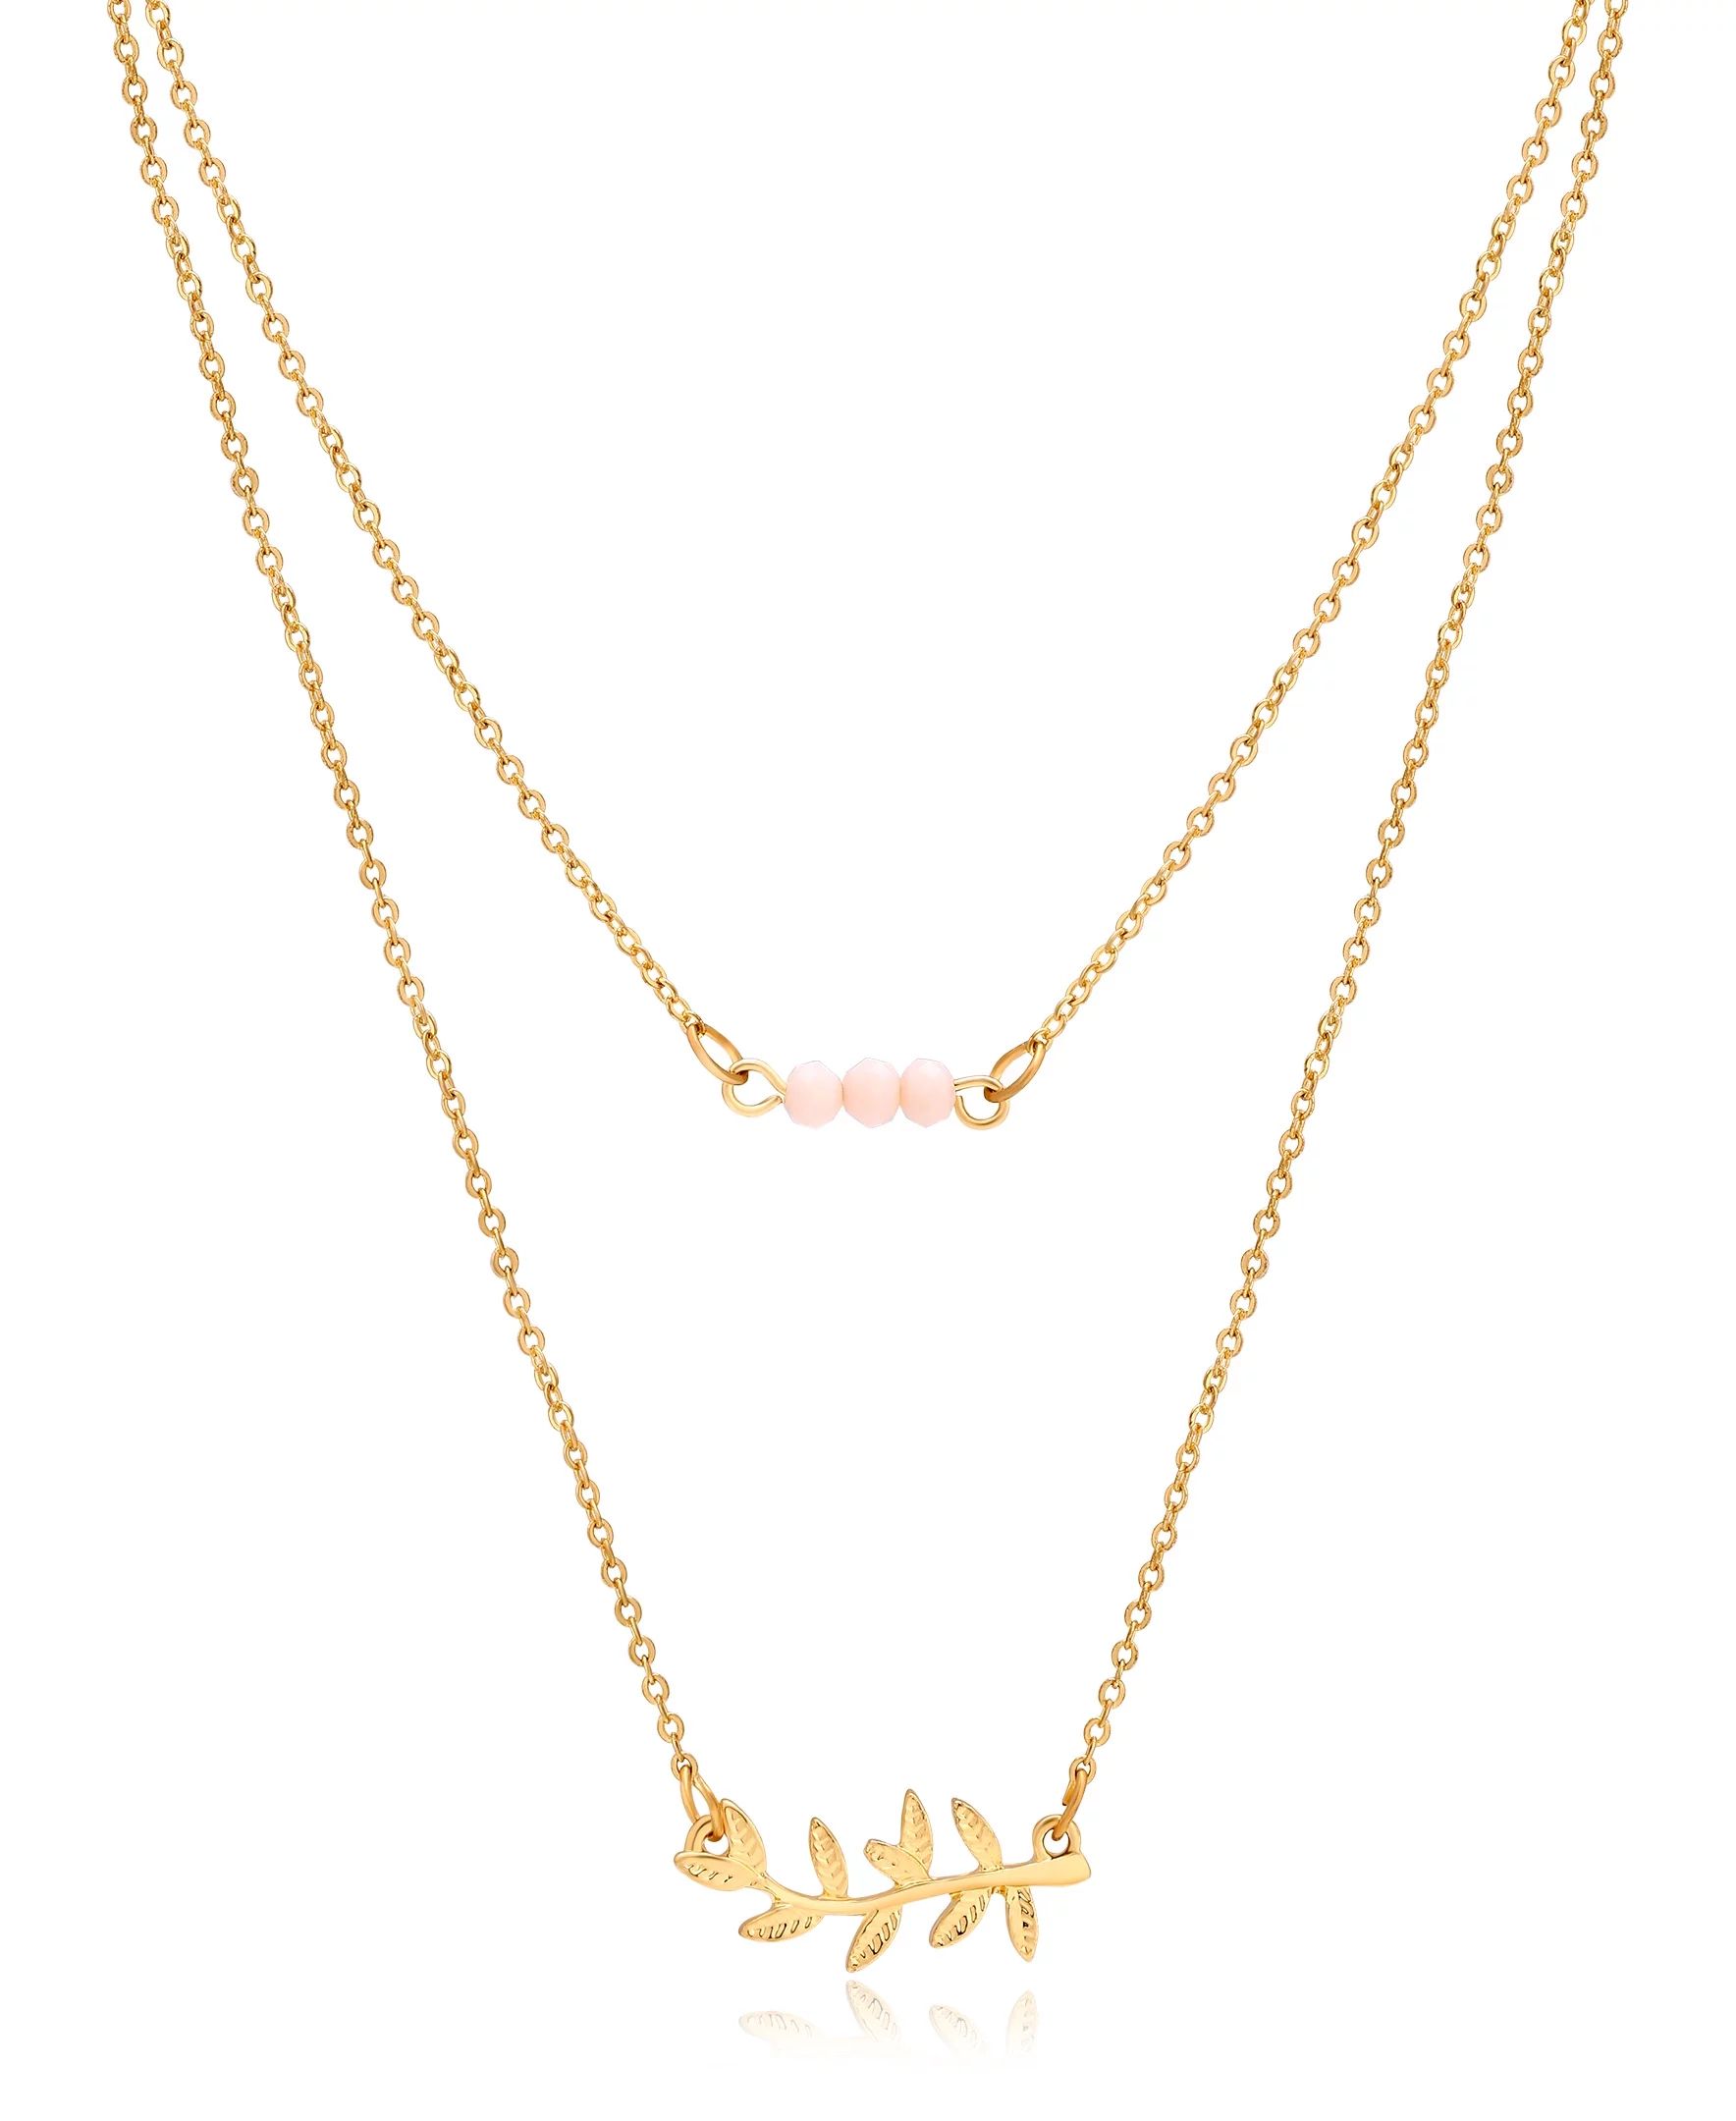 Duo imitation gold necklaces. One is 16" adjustable with 3 glass rhondelles.  One is 18" adjustab... | Walmart (US)